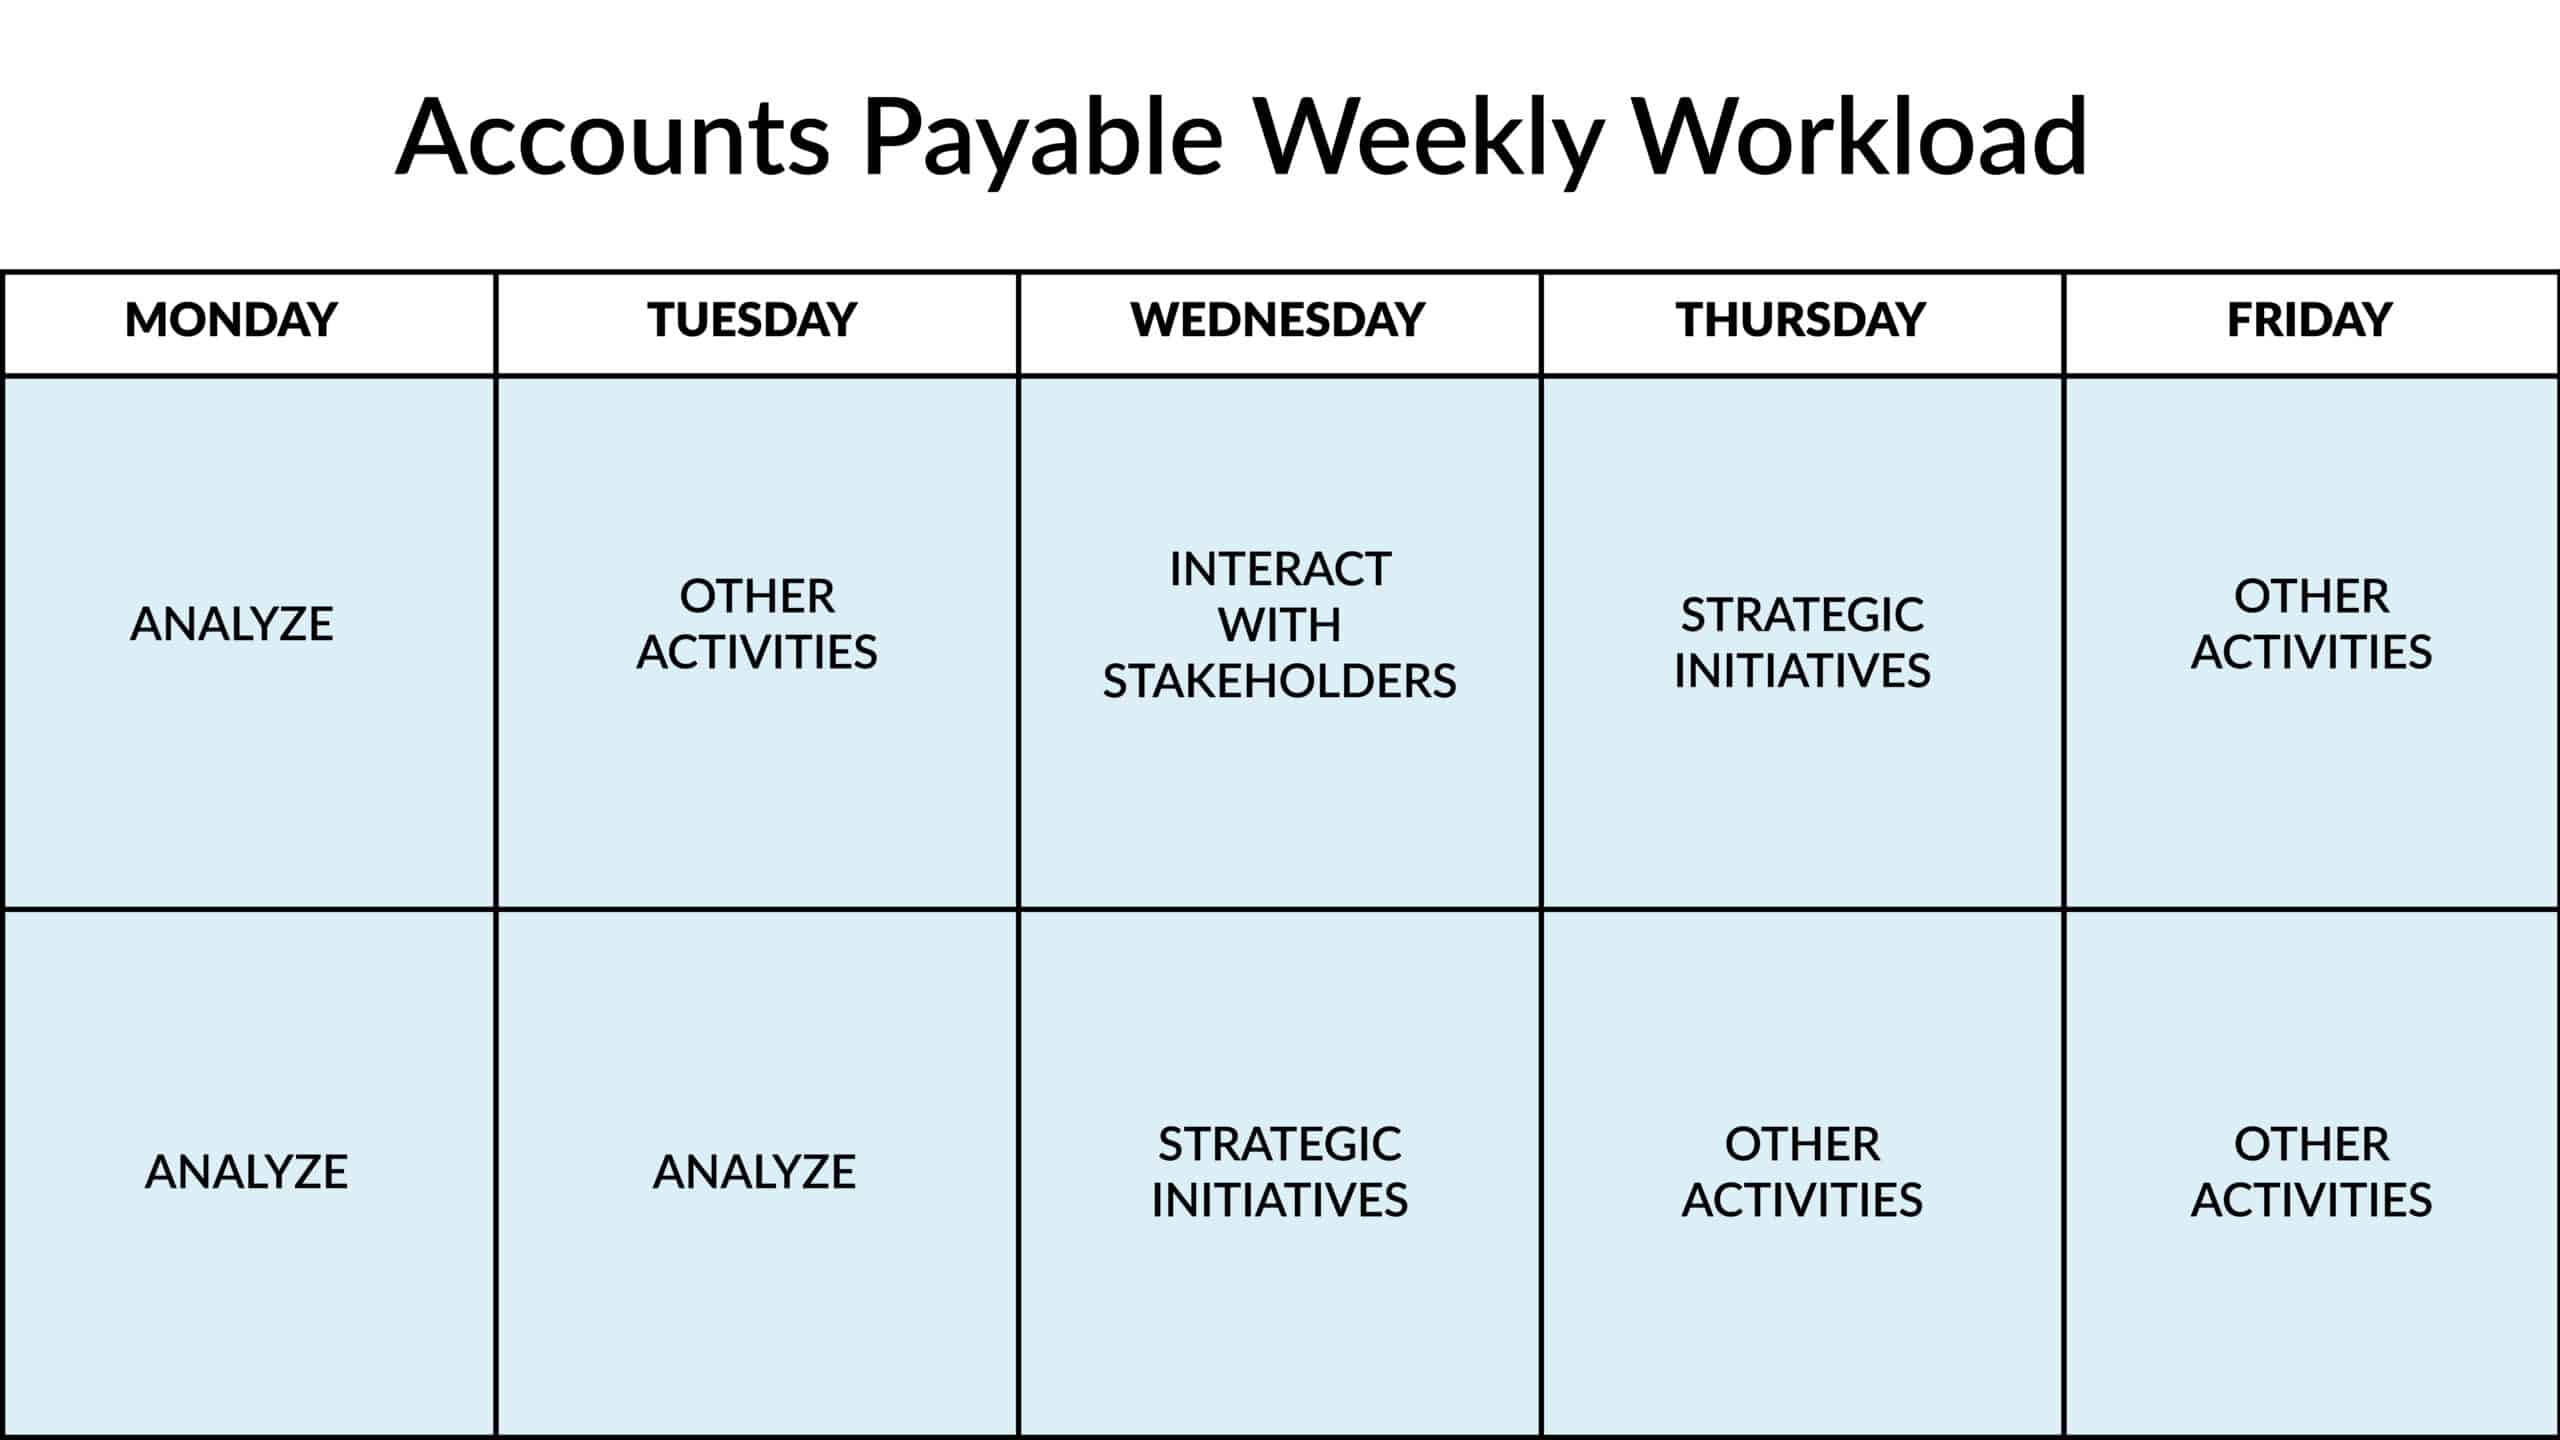 AP workload after insights and analytics